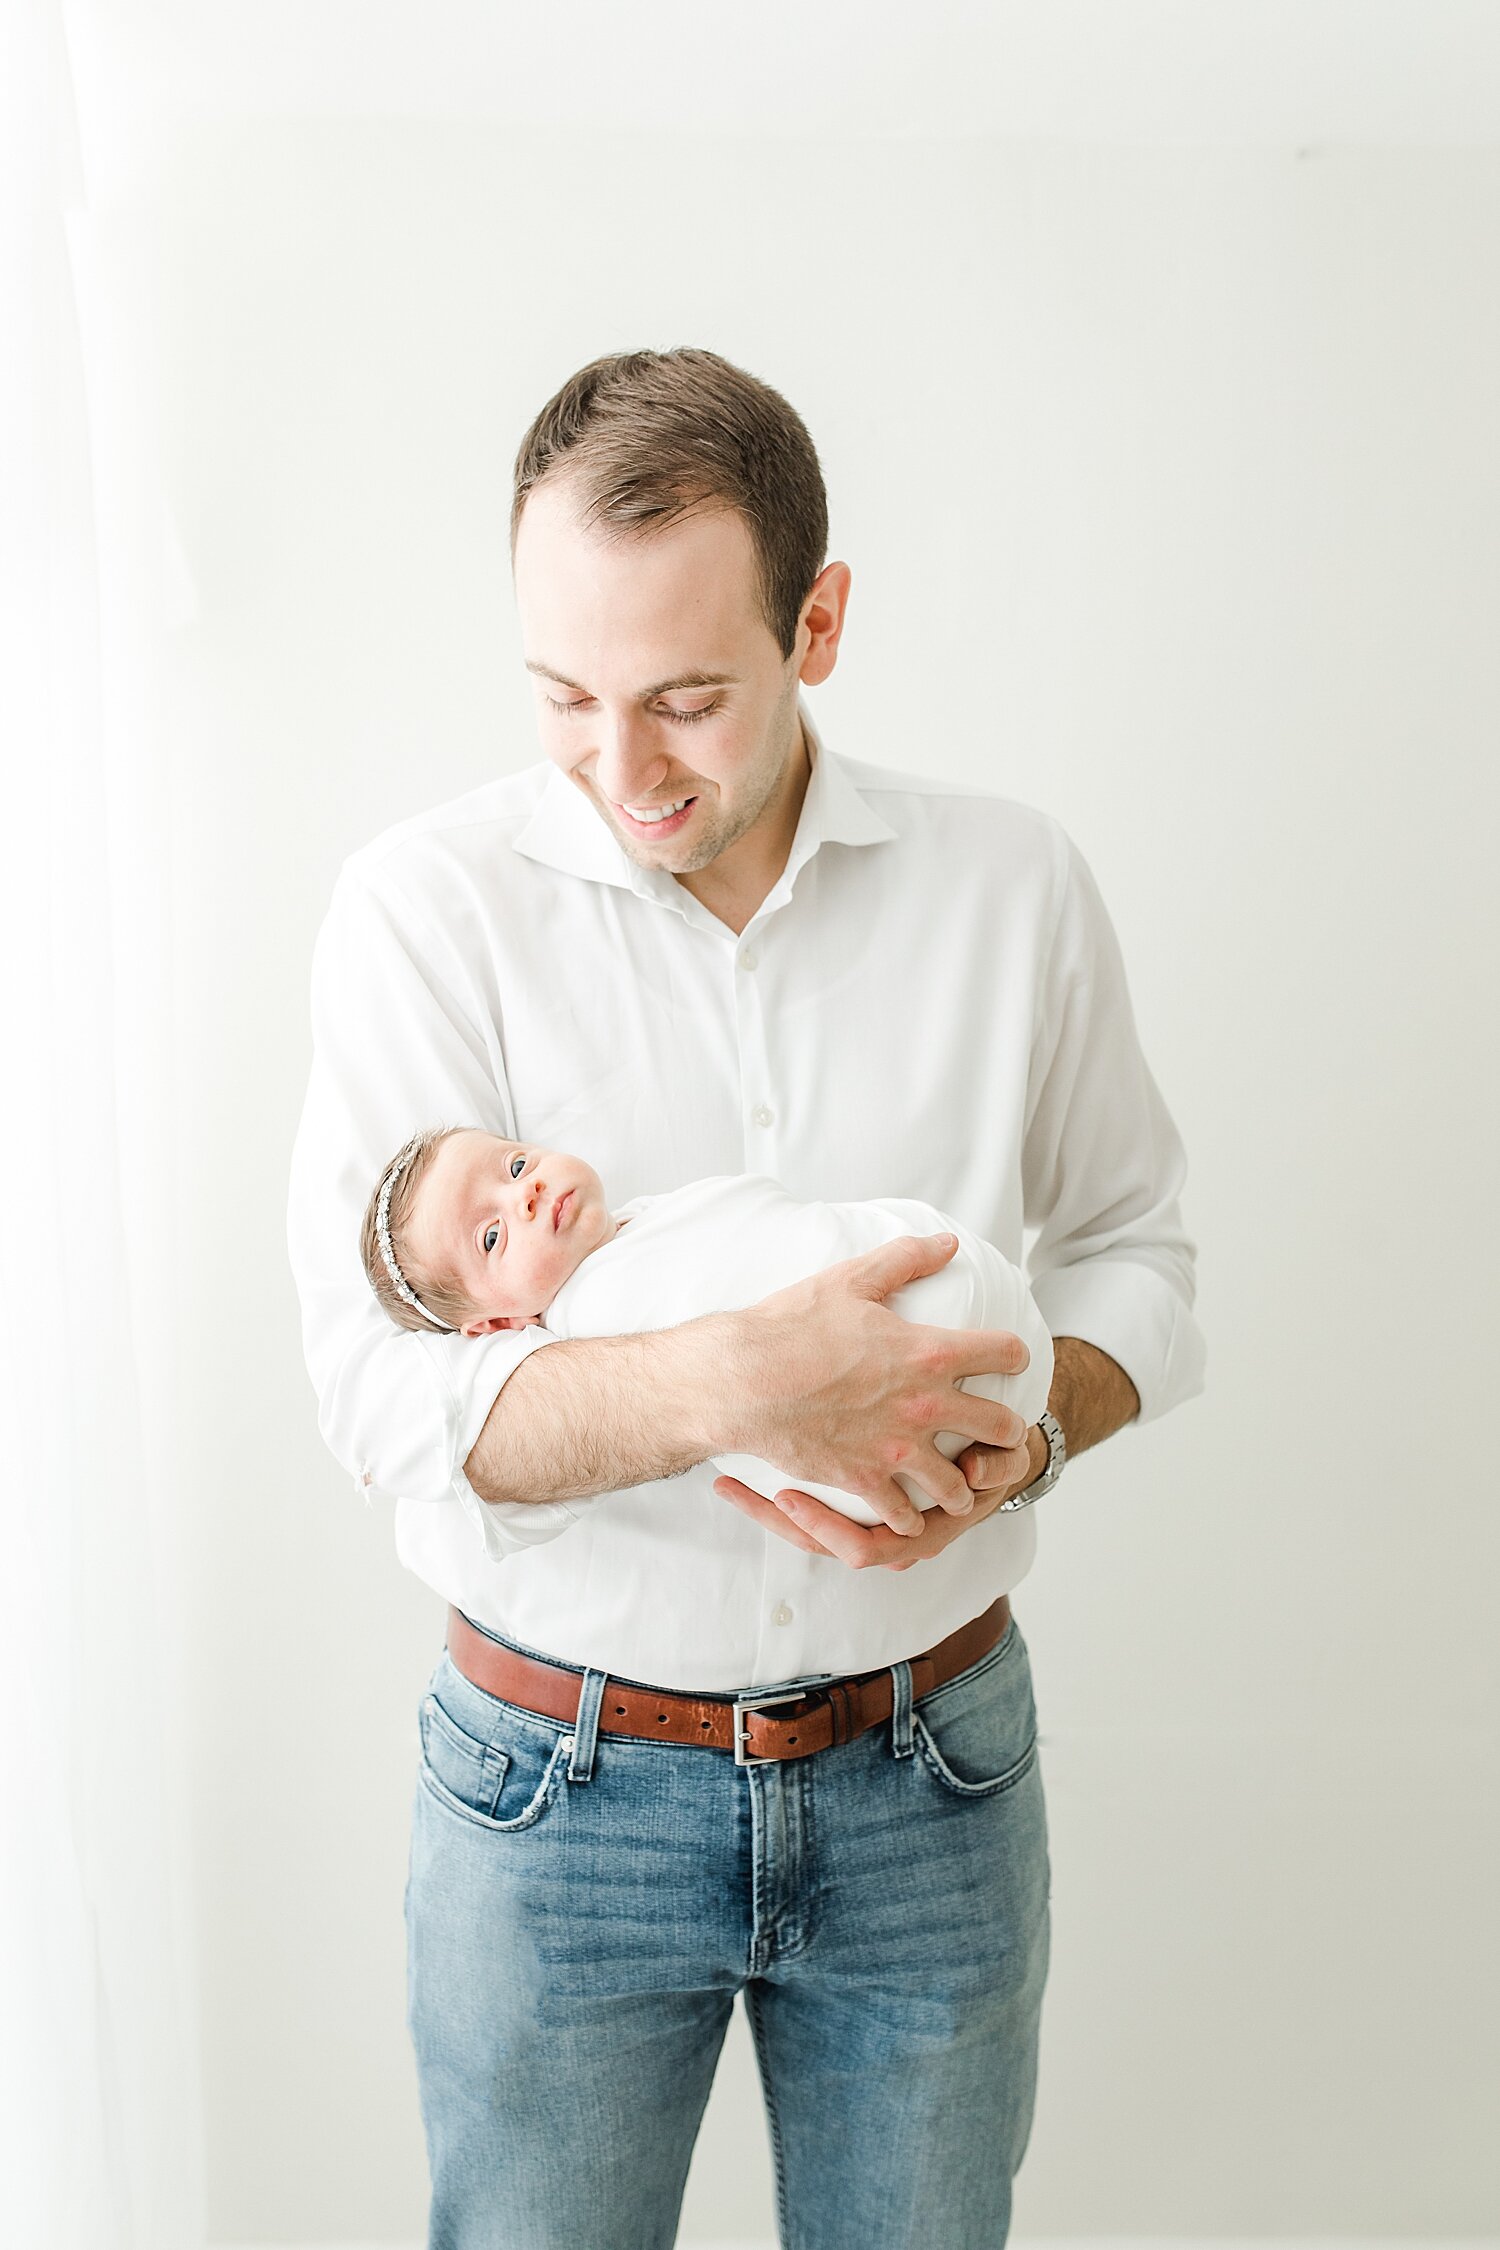 Dad with daughter during newborn photoshoot. Photos by Kristin Wood Photography.